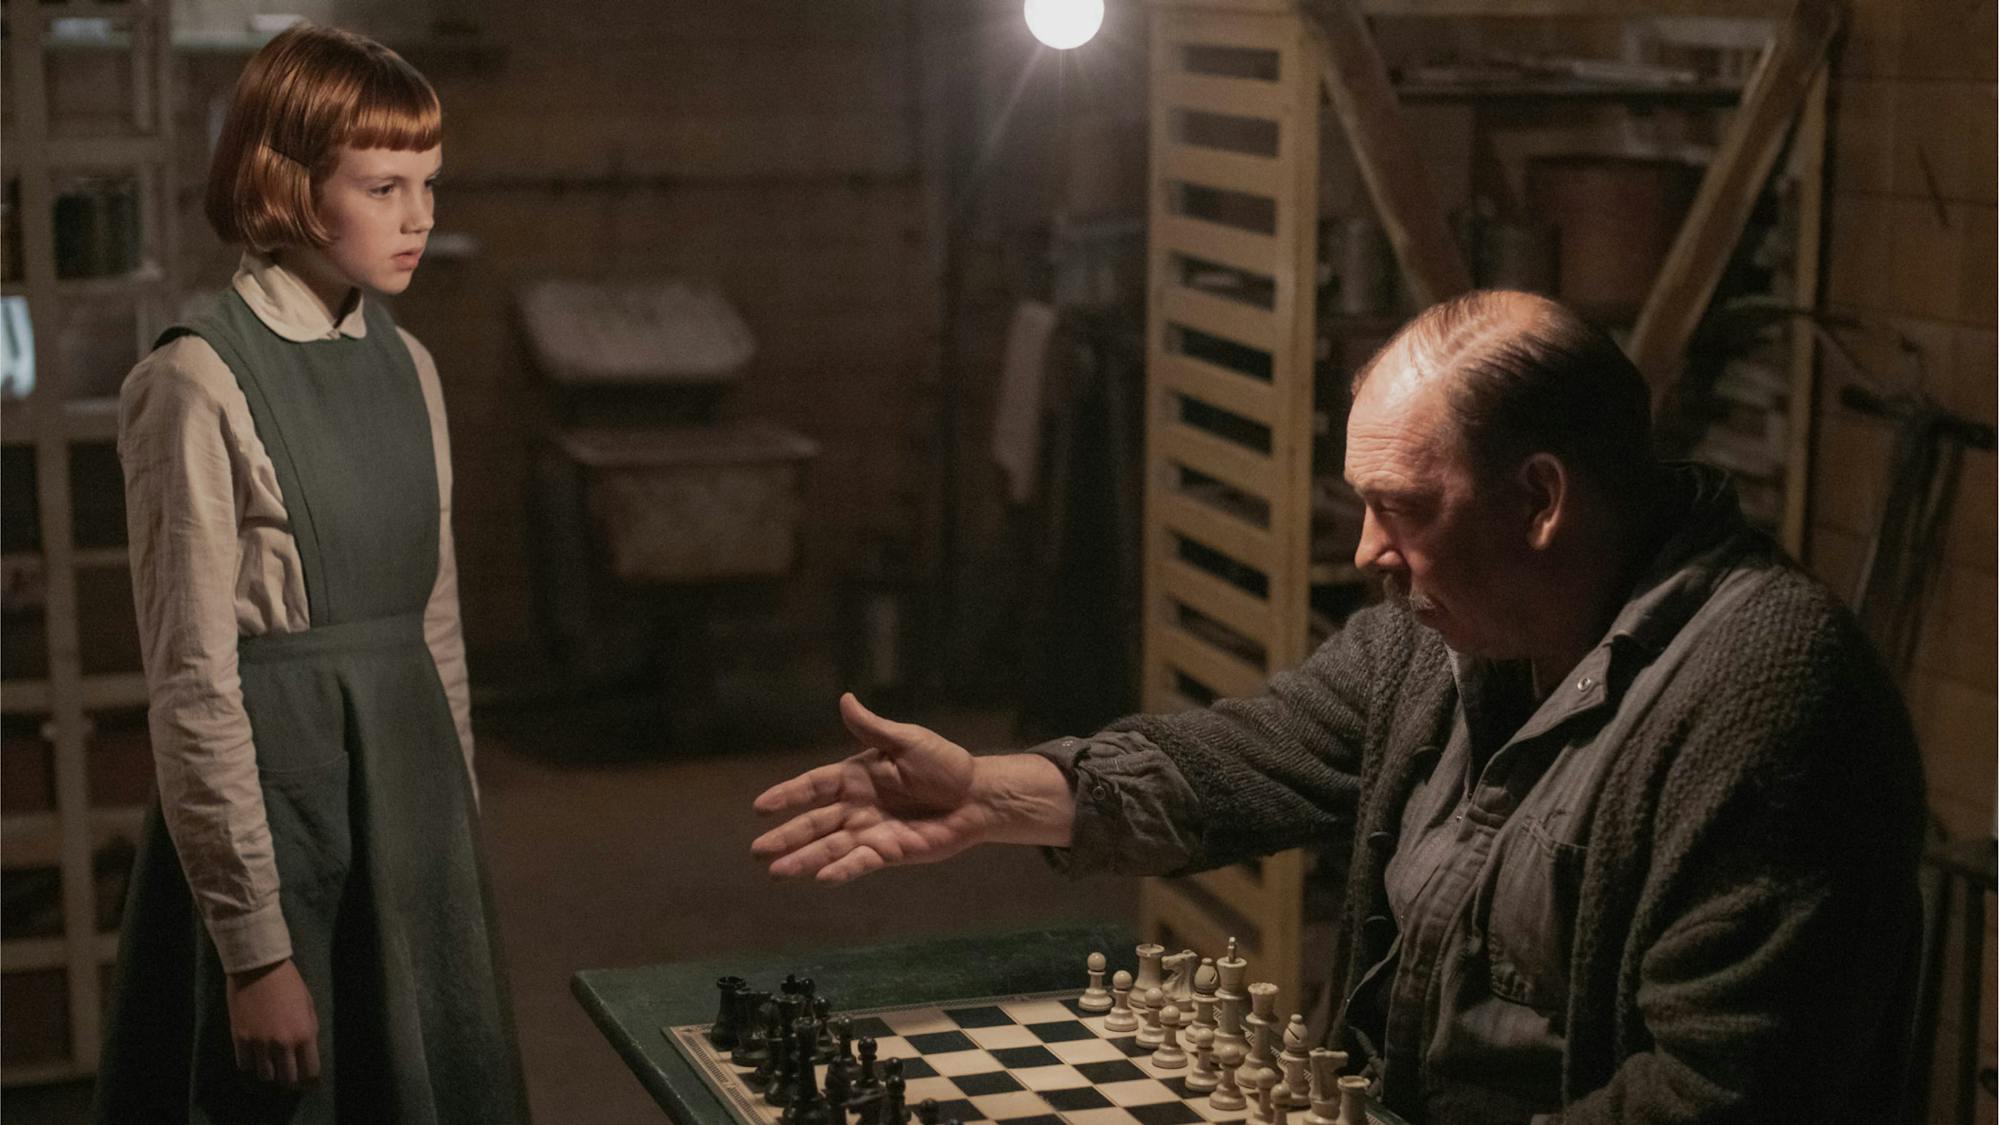 Bill Camp’s character in The Queen’s Gambit, Mr. Shaibel, gesturing for a young Beth Harmon to join him at the chess board. She wears a gray tunic, a long-sleeved buttonned down shirt, and has her signature red bob. He wears all gray, and is surrounded by his janitorial tools.